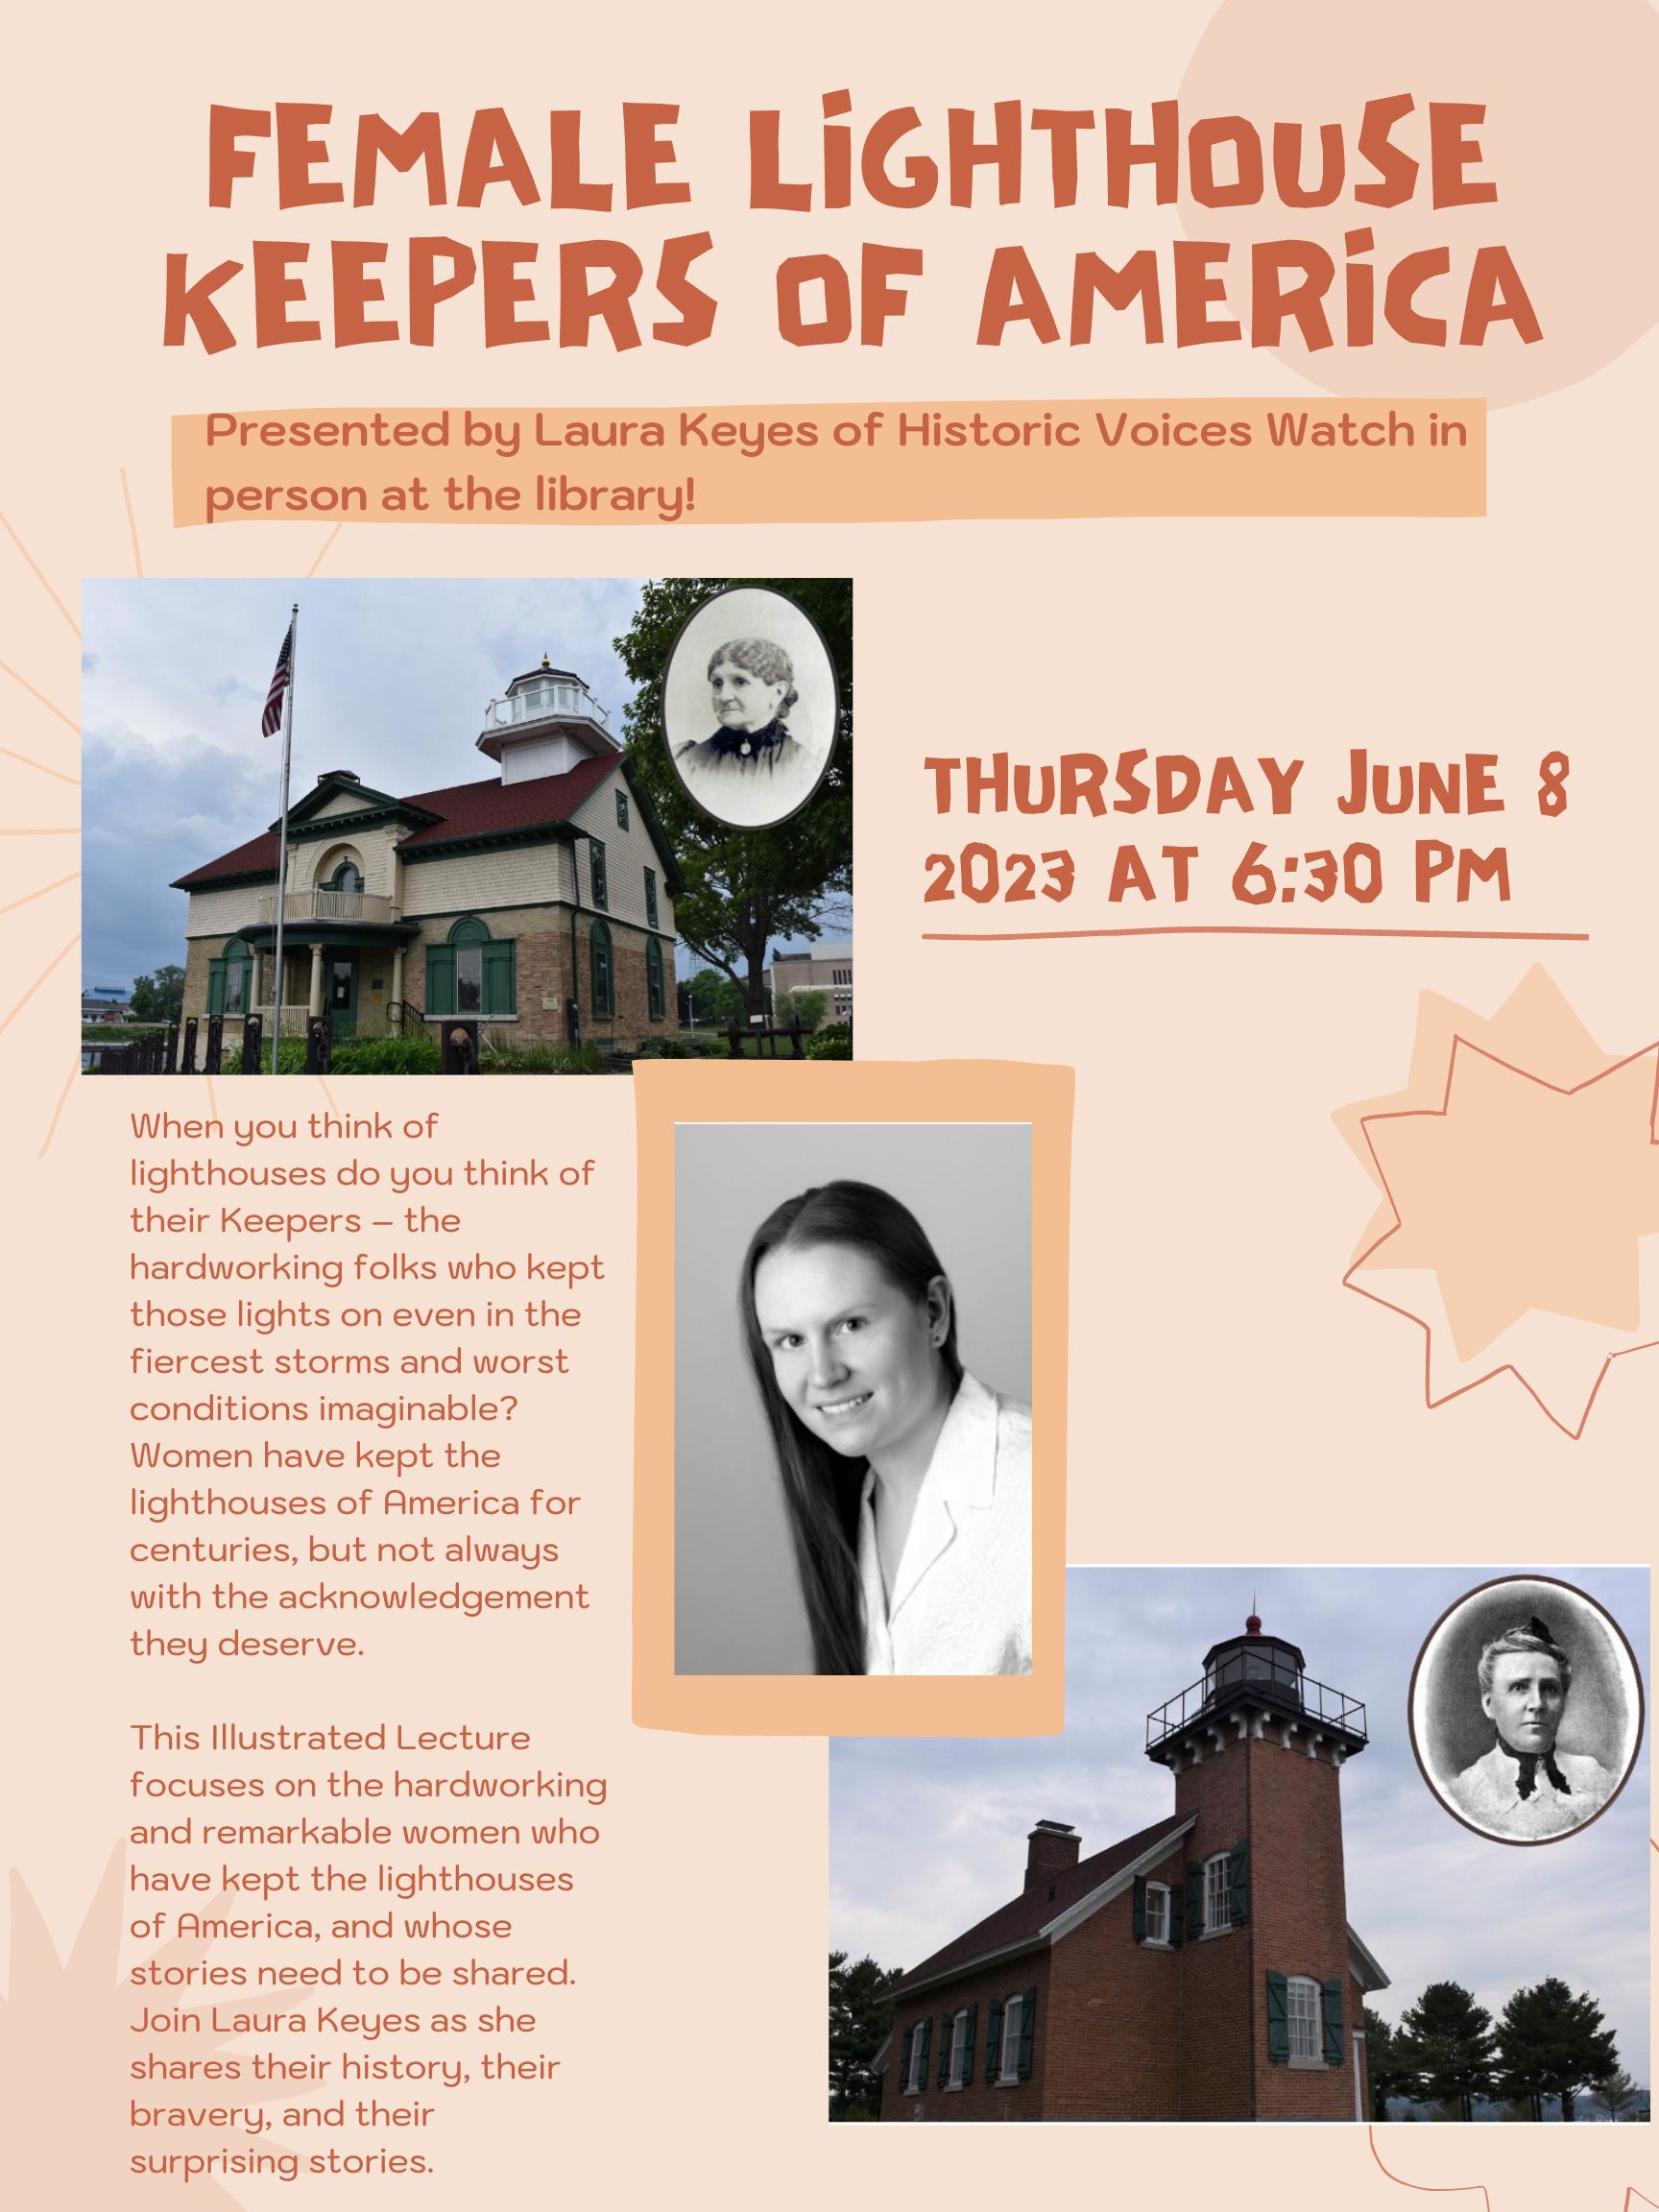 Virtual Presentation of "Female Lighthouse Keepers of America"